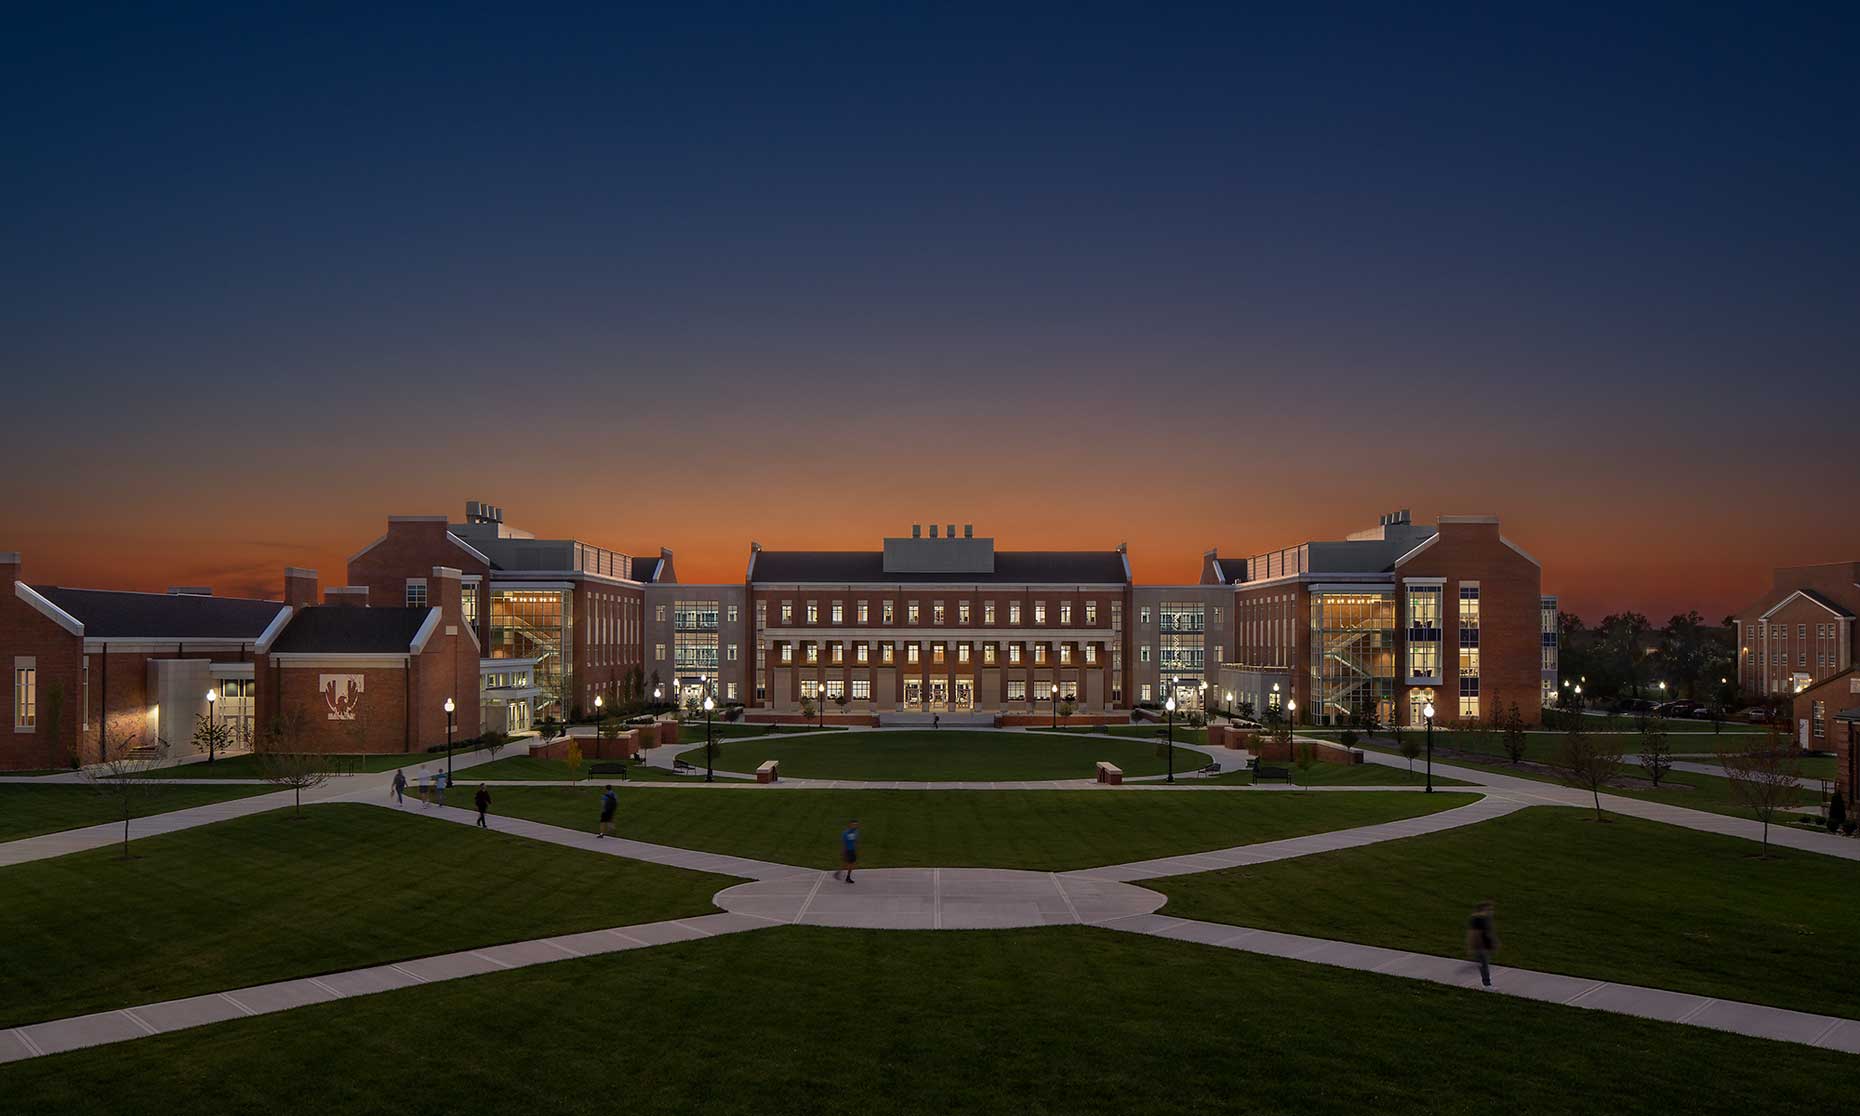 A twilight view of the Lab Science building and student quad at TN Tech